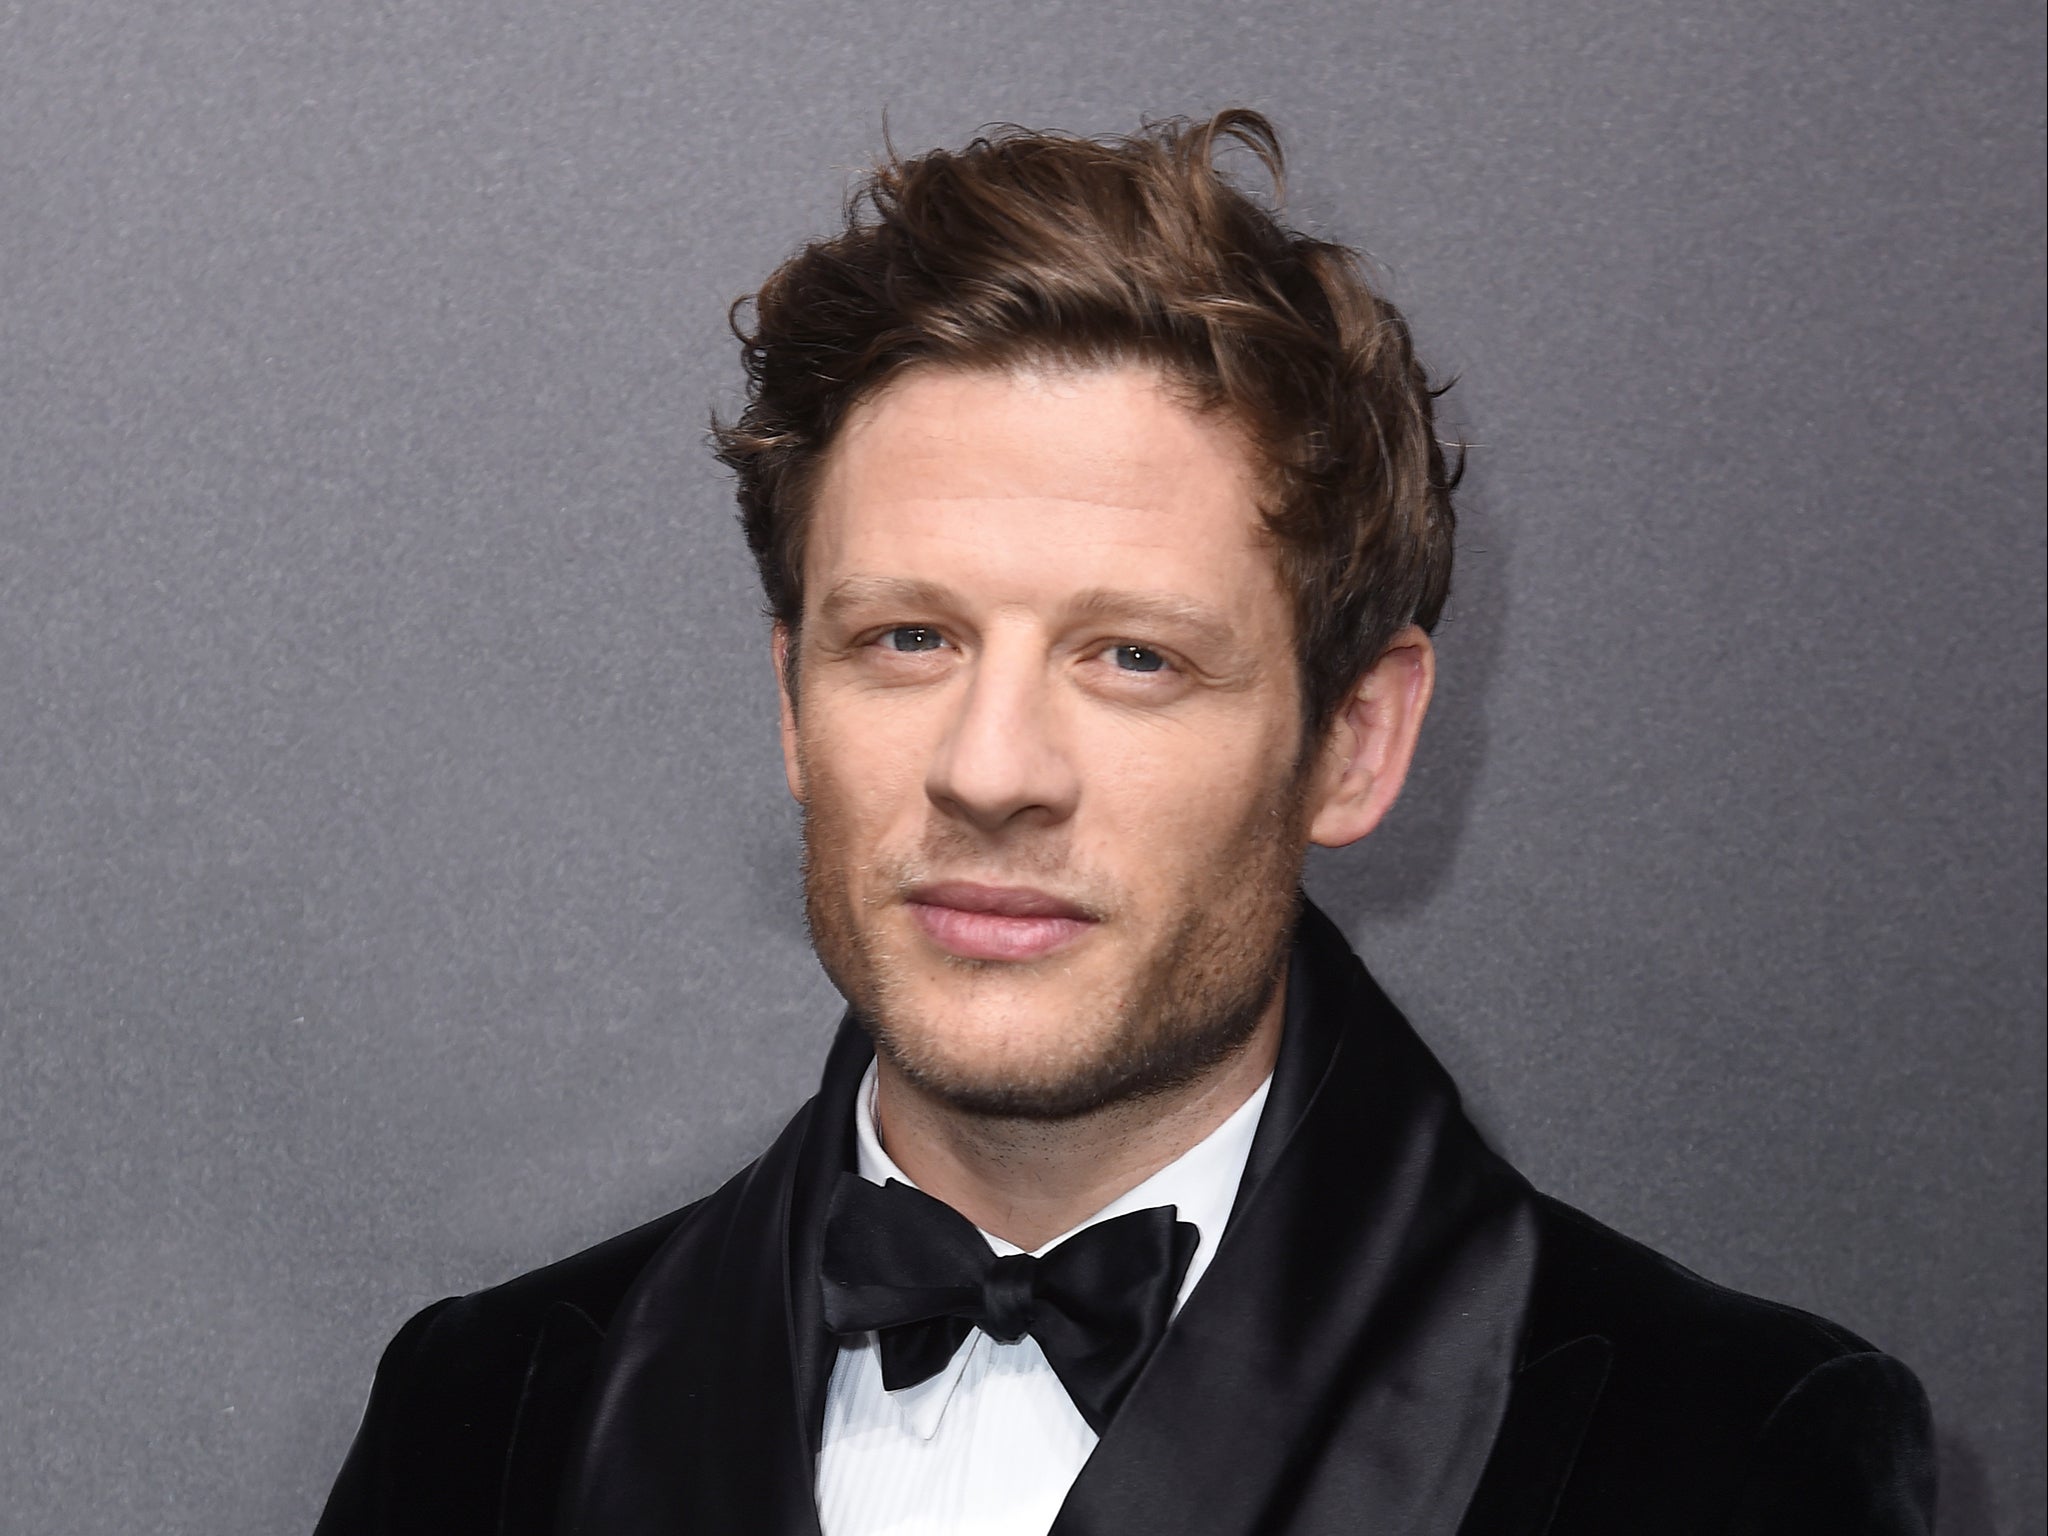 James Norton If playing Bond precluded films like this, it would be a hard thing for me to swallow The Independent pic